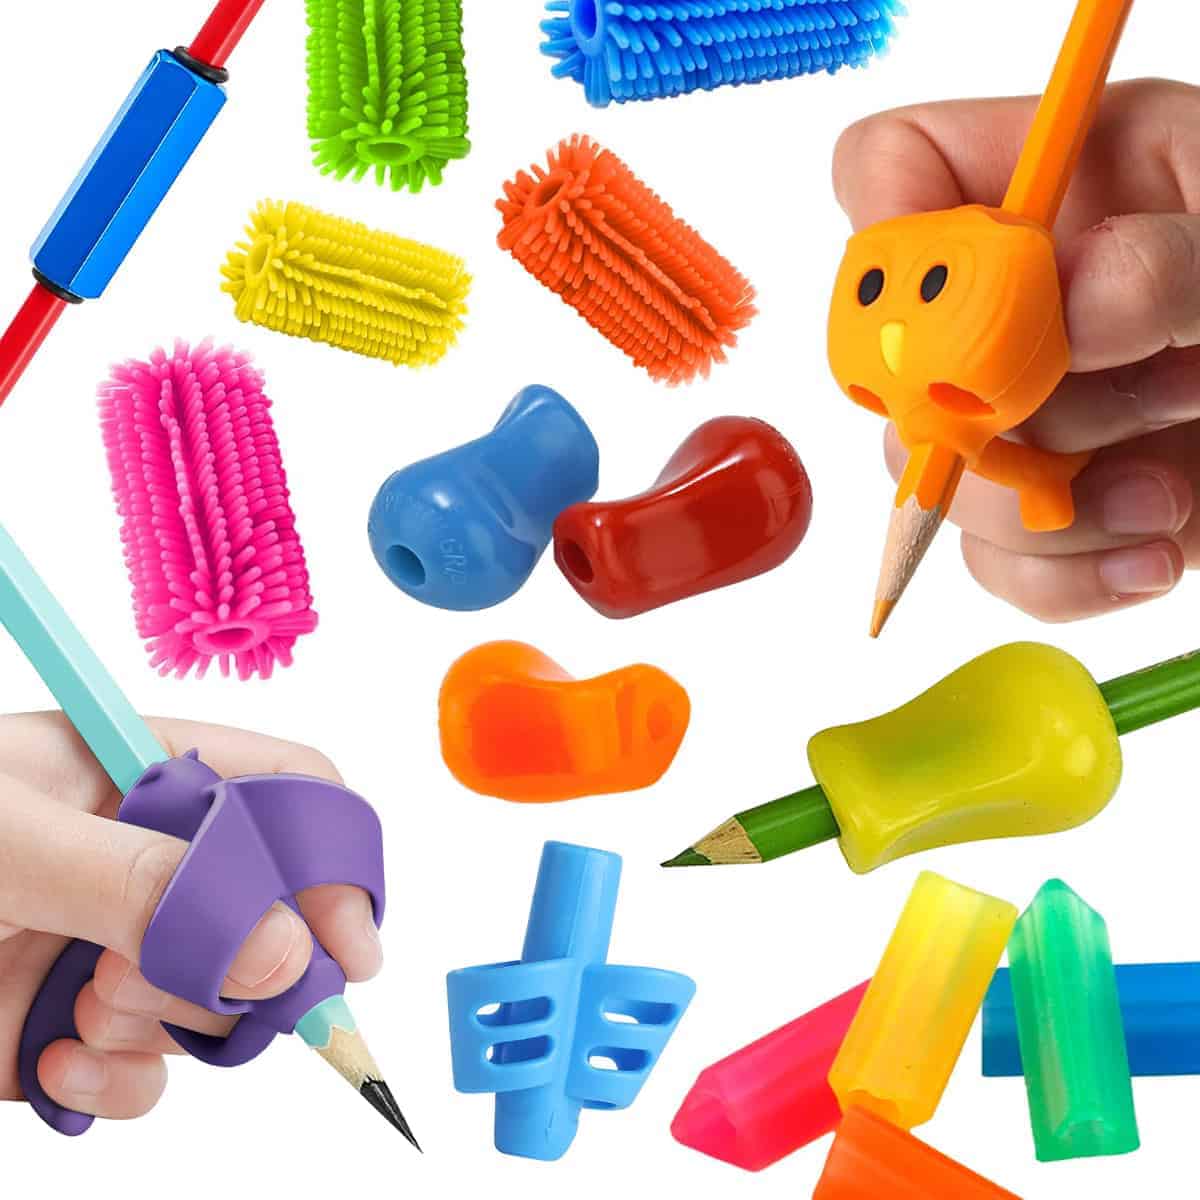 7 Best Pencil Grips for Kids Handwriting